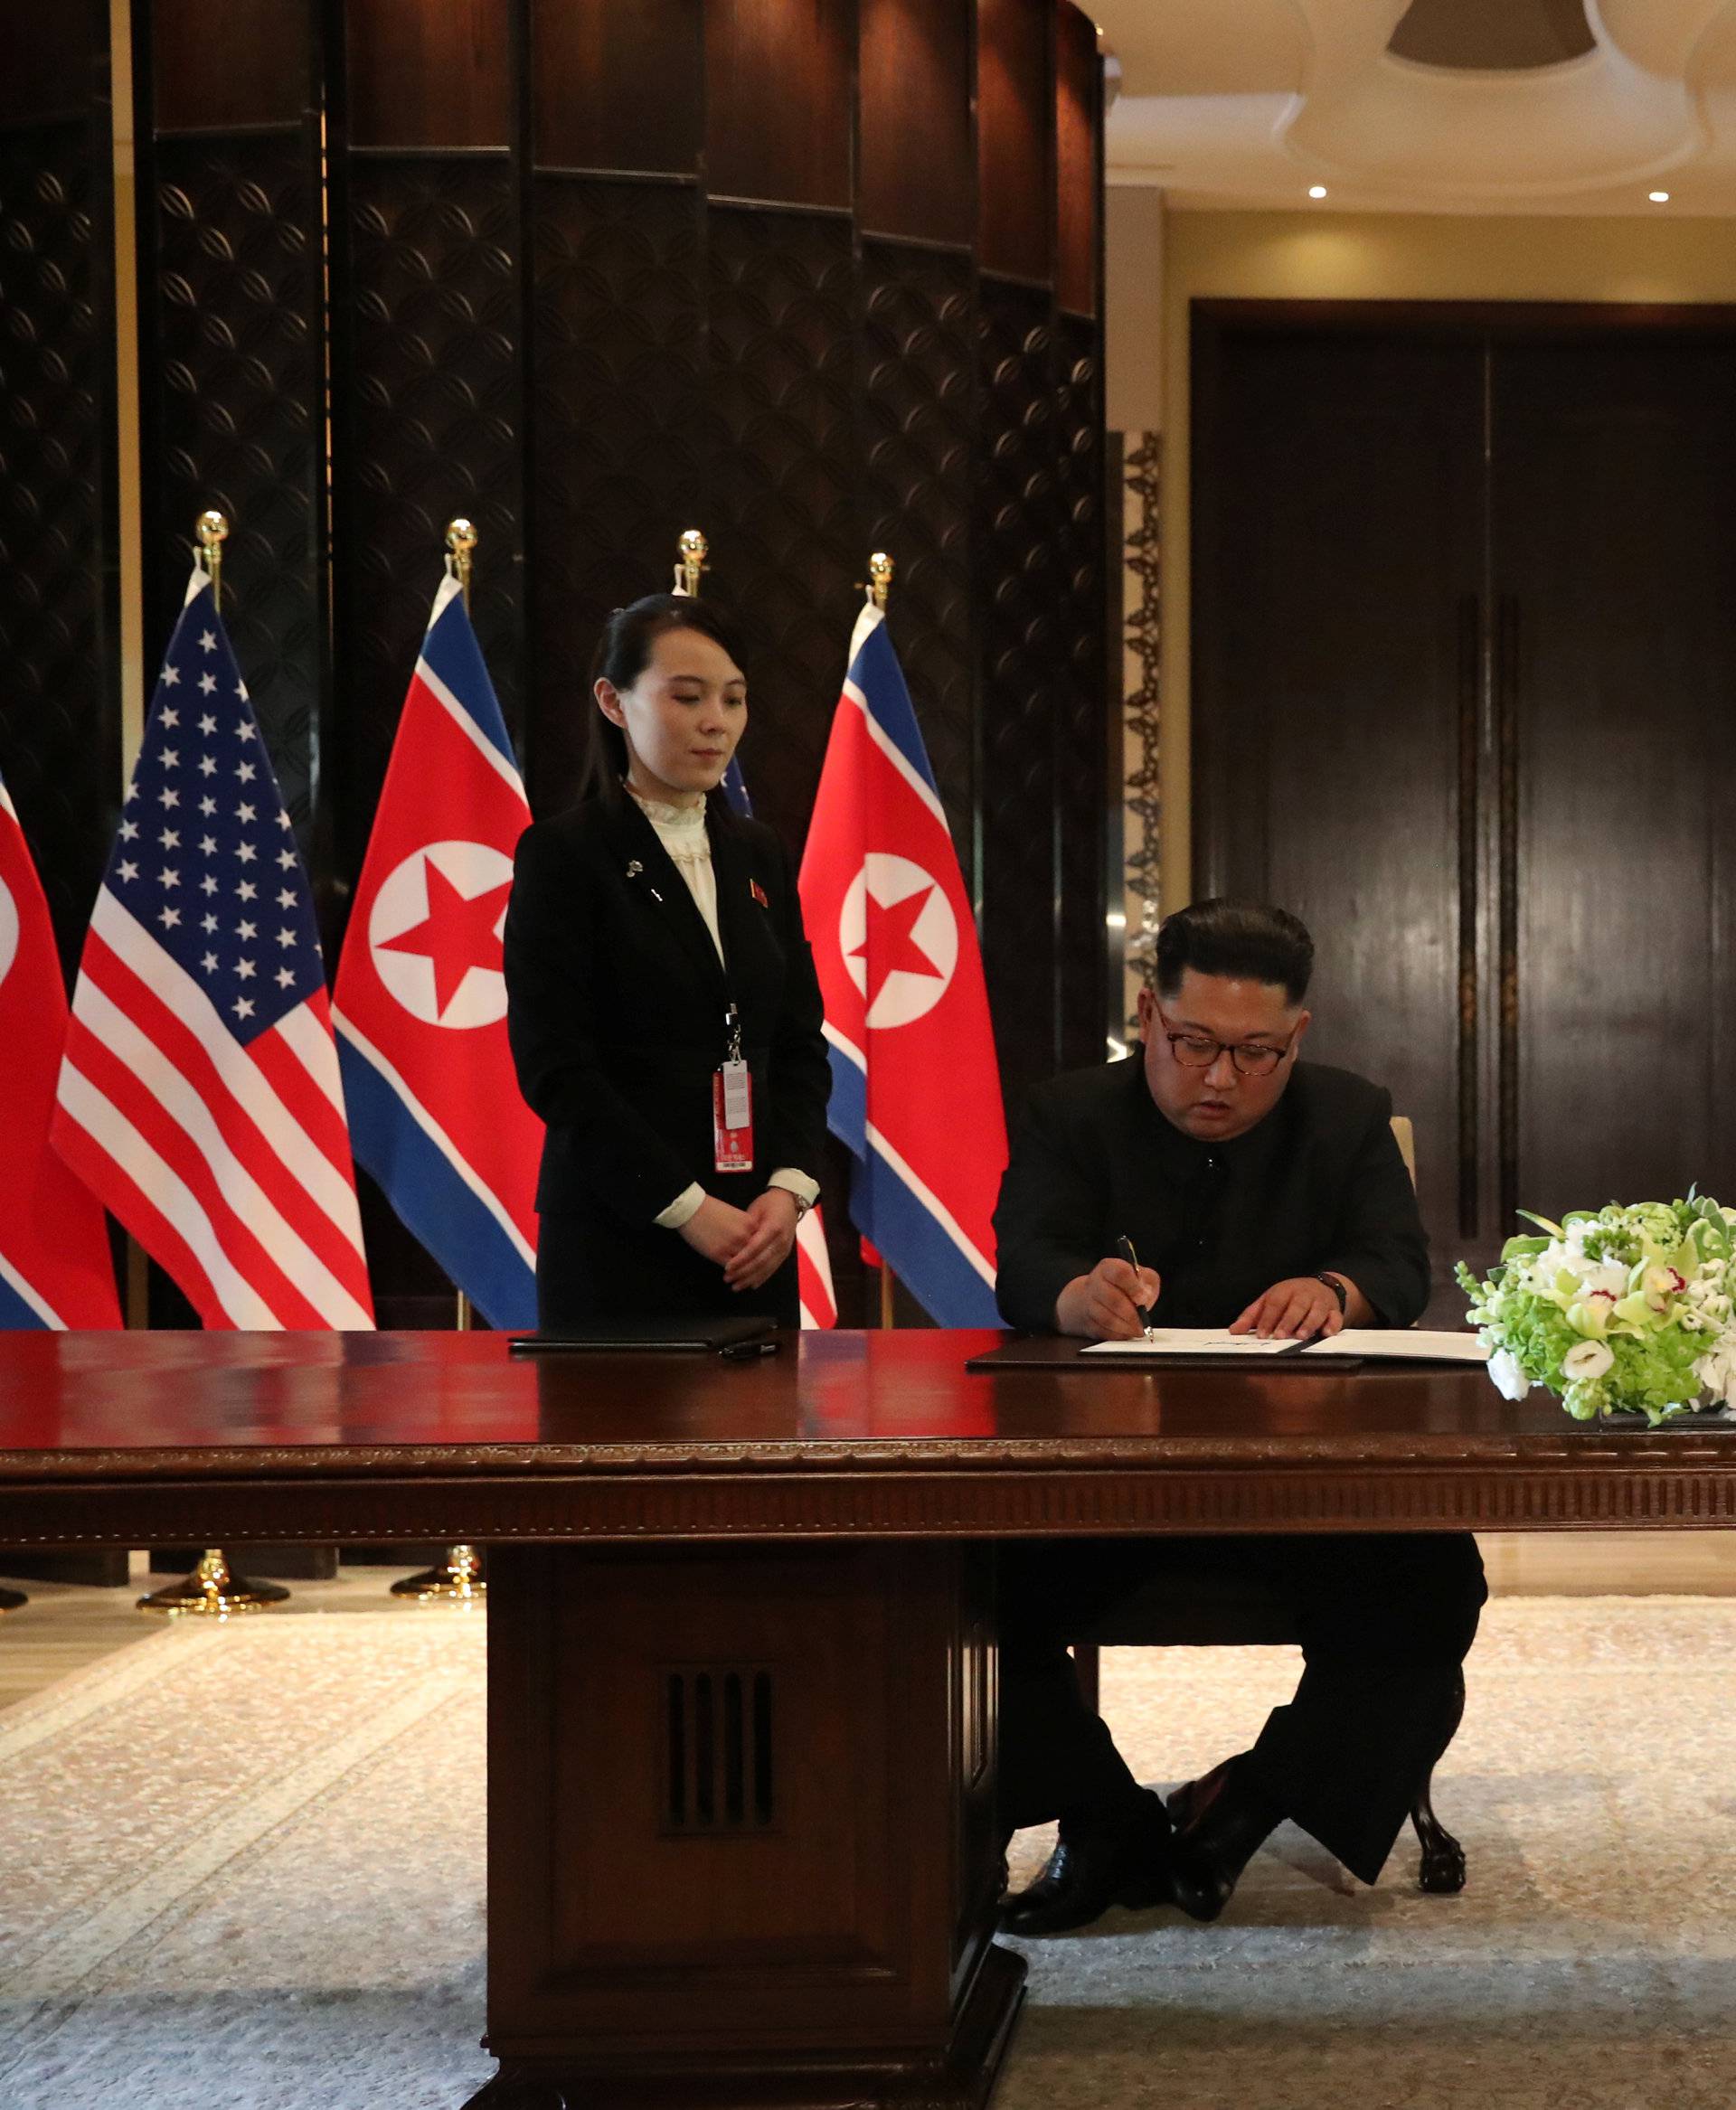 U.S. President Donald Trump and North Korea's leader Kim Jong Un sign documents, after their summit in Singapore